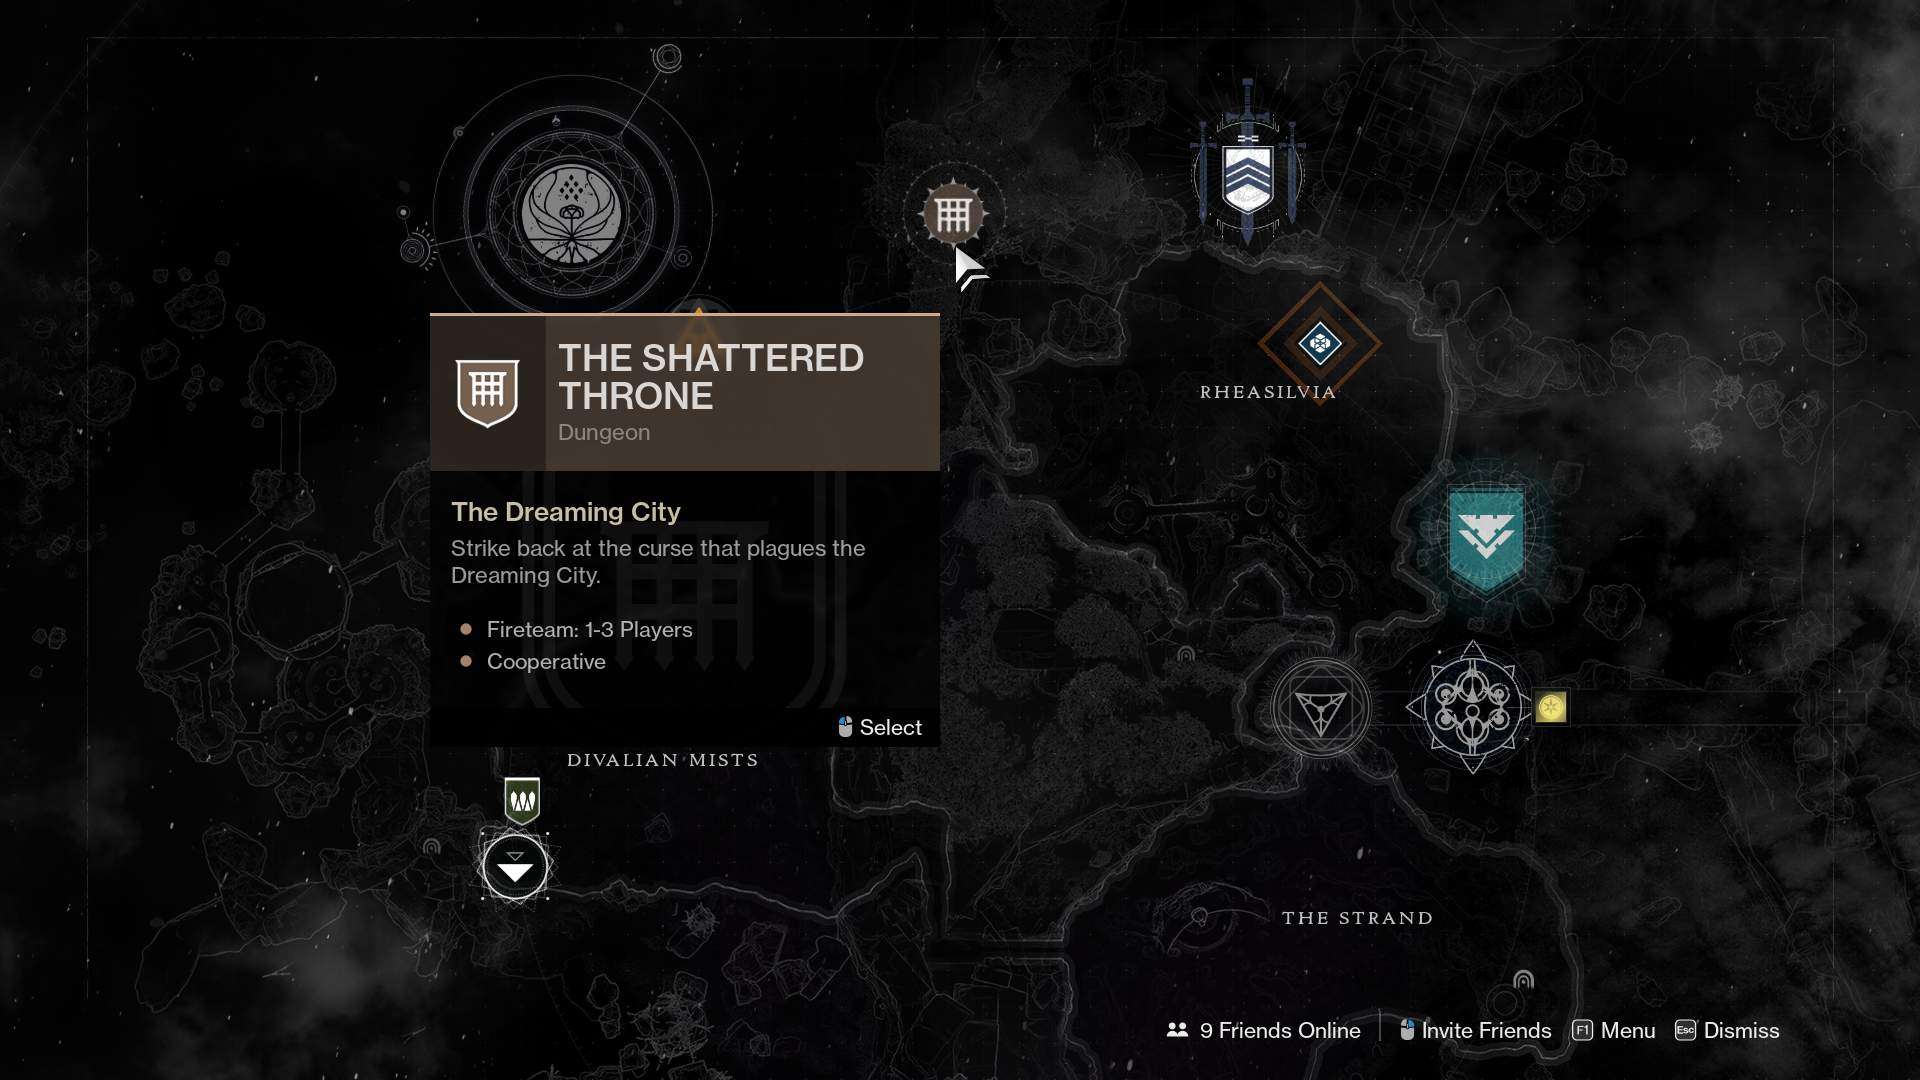 Shattered Throne is the Dungeon on The Dreaming City. 